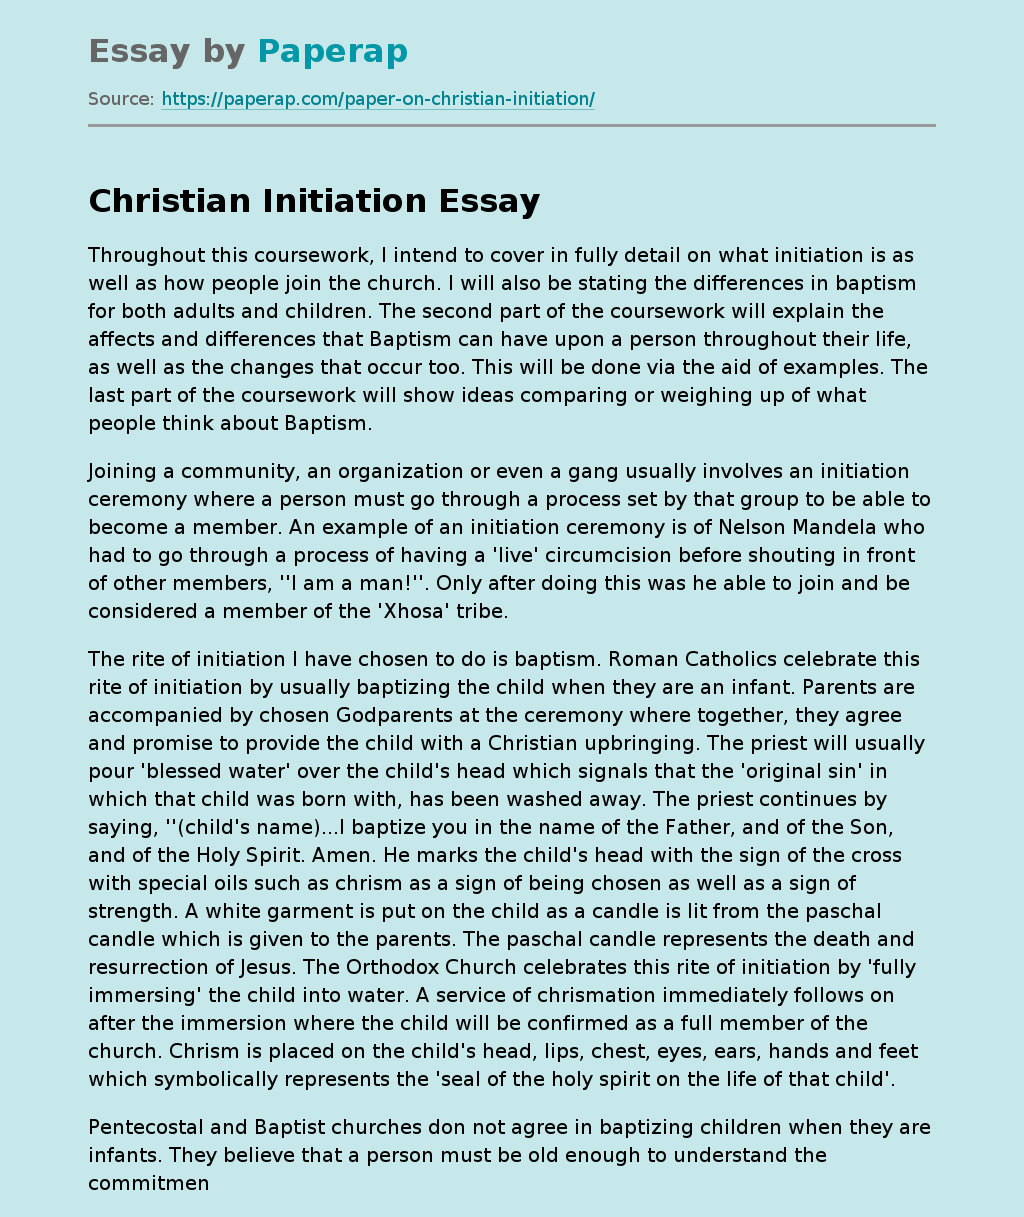 My Thoughts About Christian Initiation